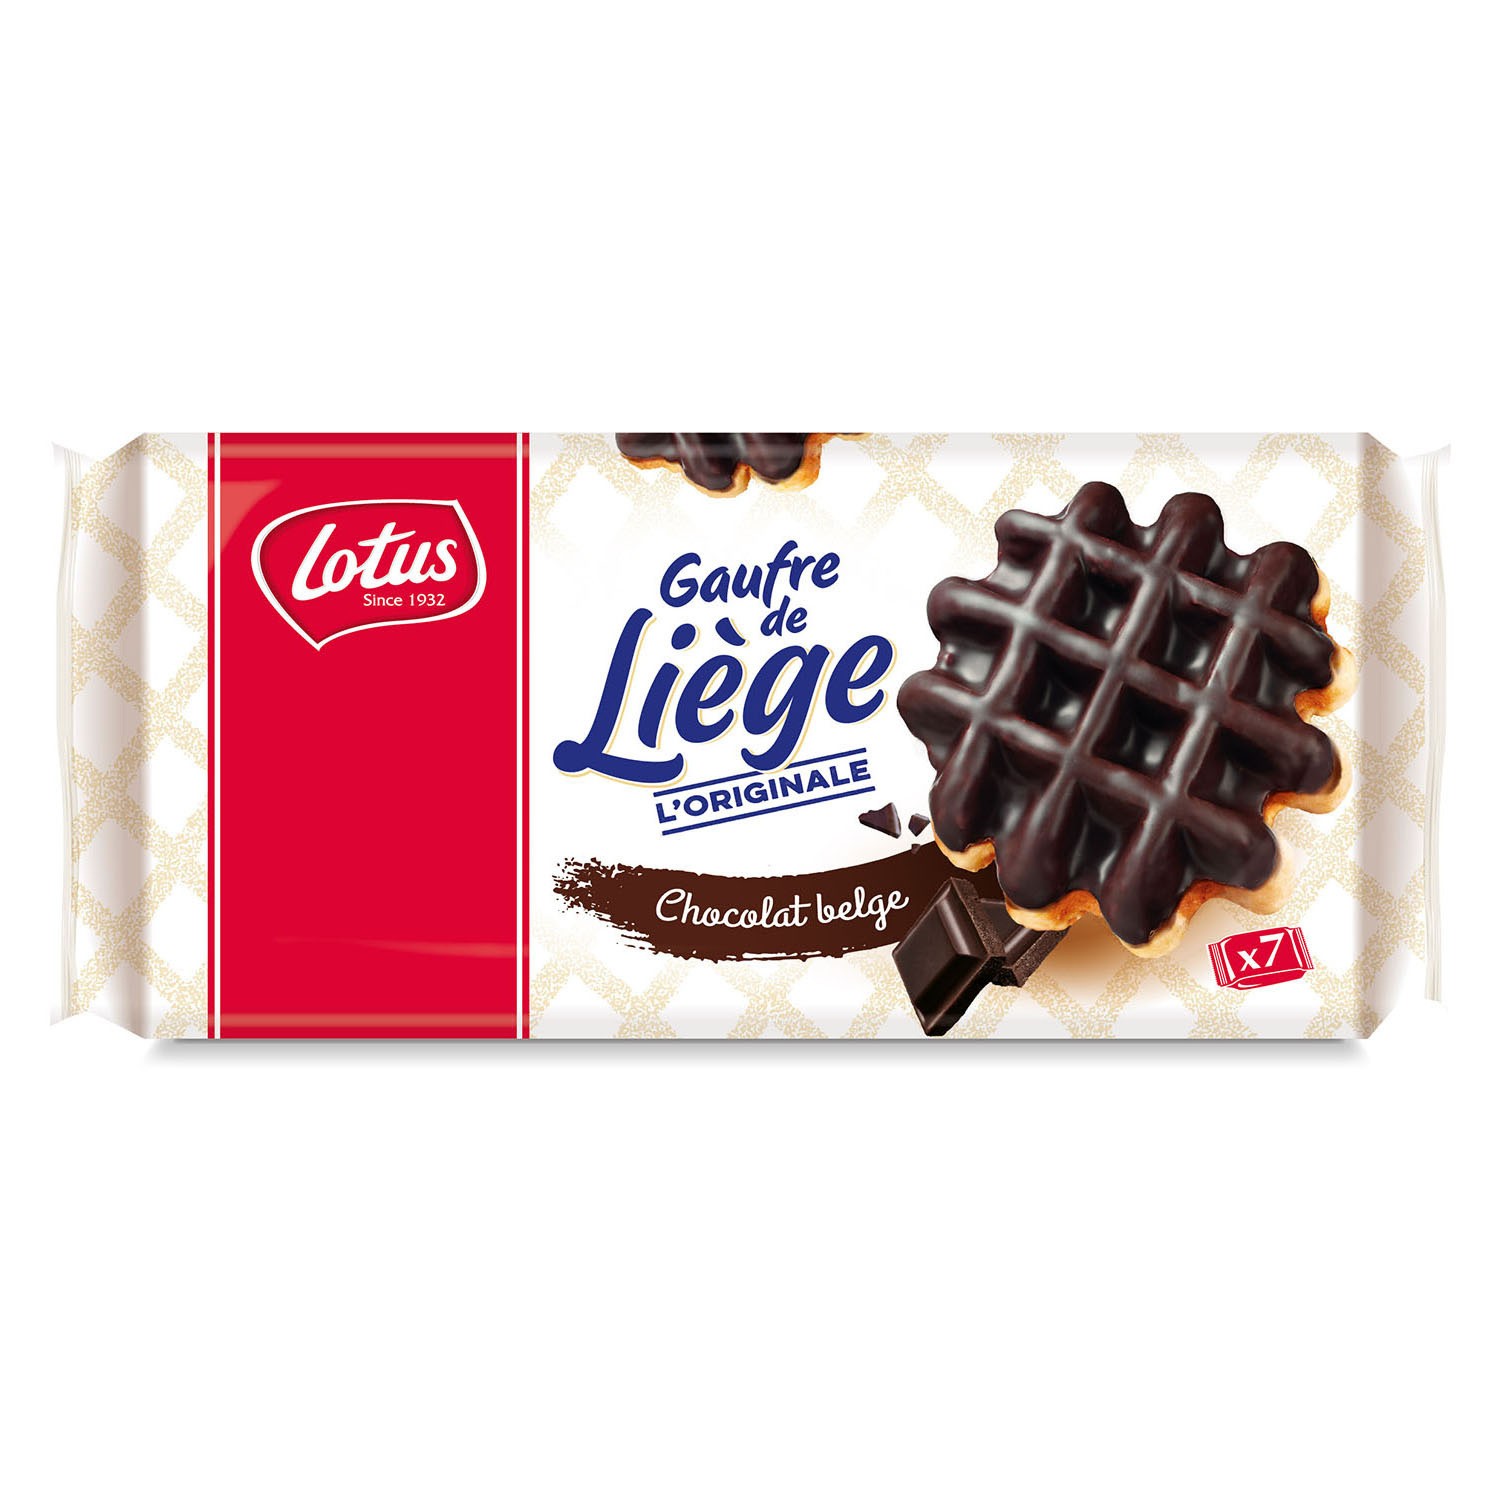 Lotus Lieges chocolate waffles x 7 350g